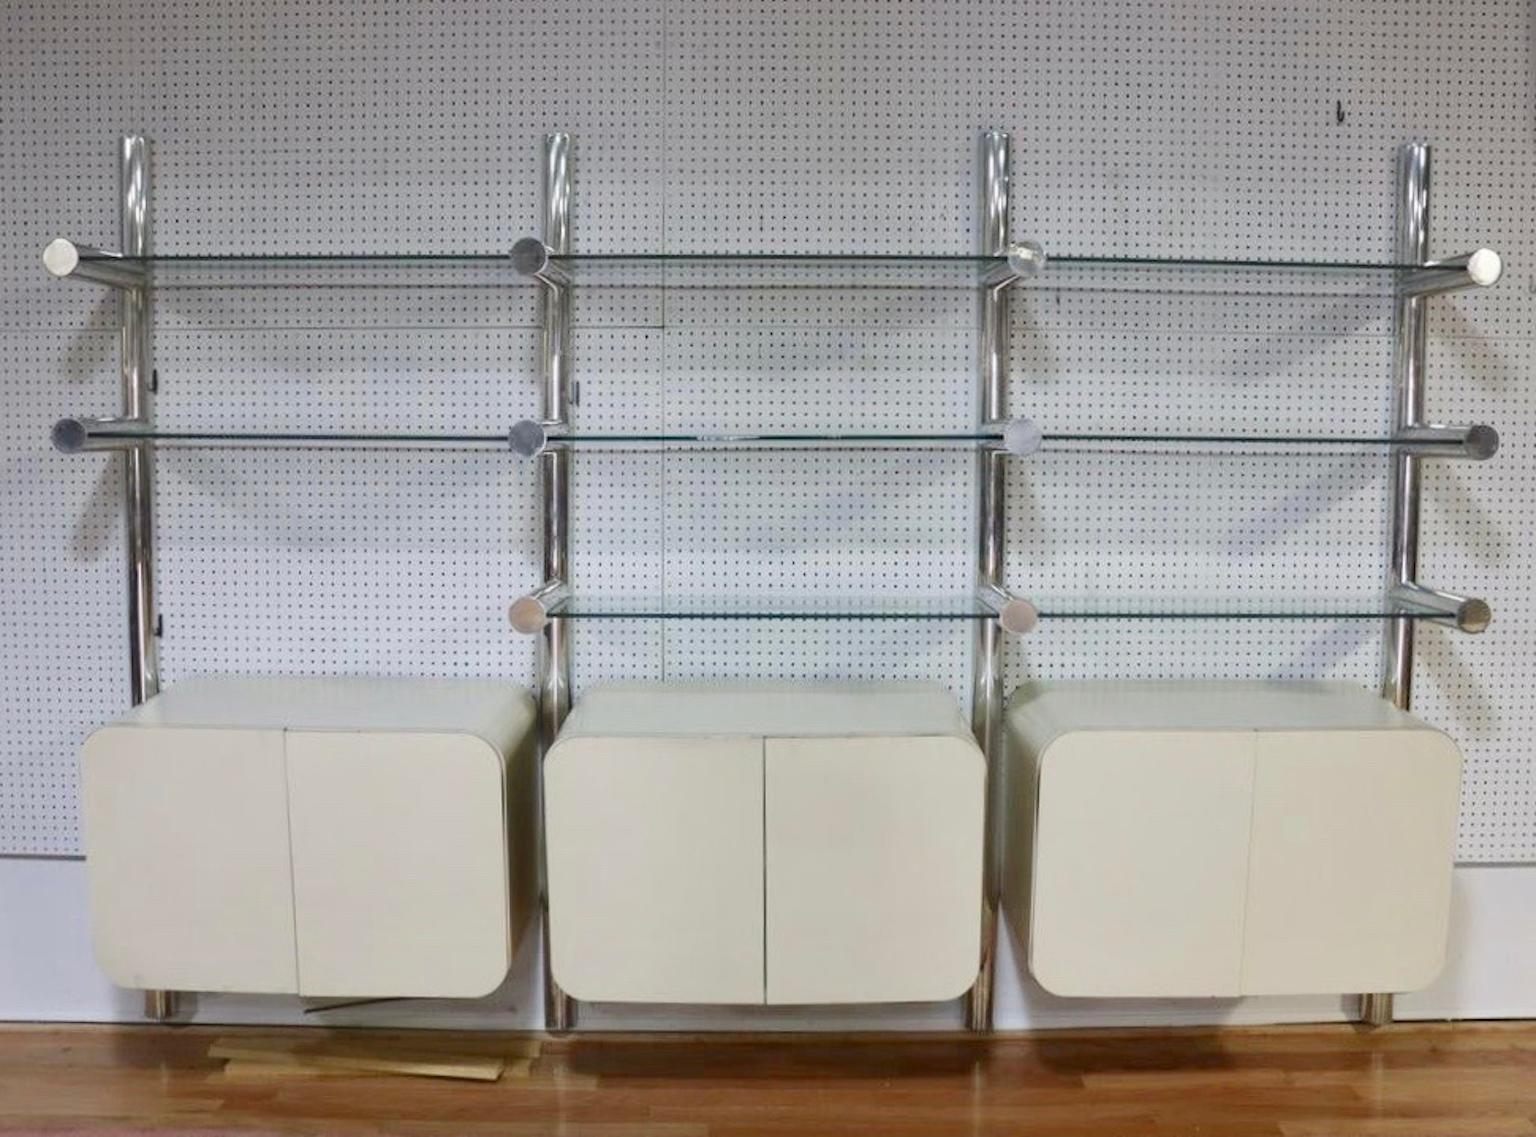 Pace collection ORBA wall system by Janet Schweitzer, 1974. Four extruded highly polished aluminum standards incorporating half inch thick glass shelves and three white laminate cabinets. Each cabinet is 35